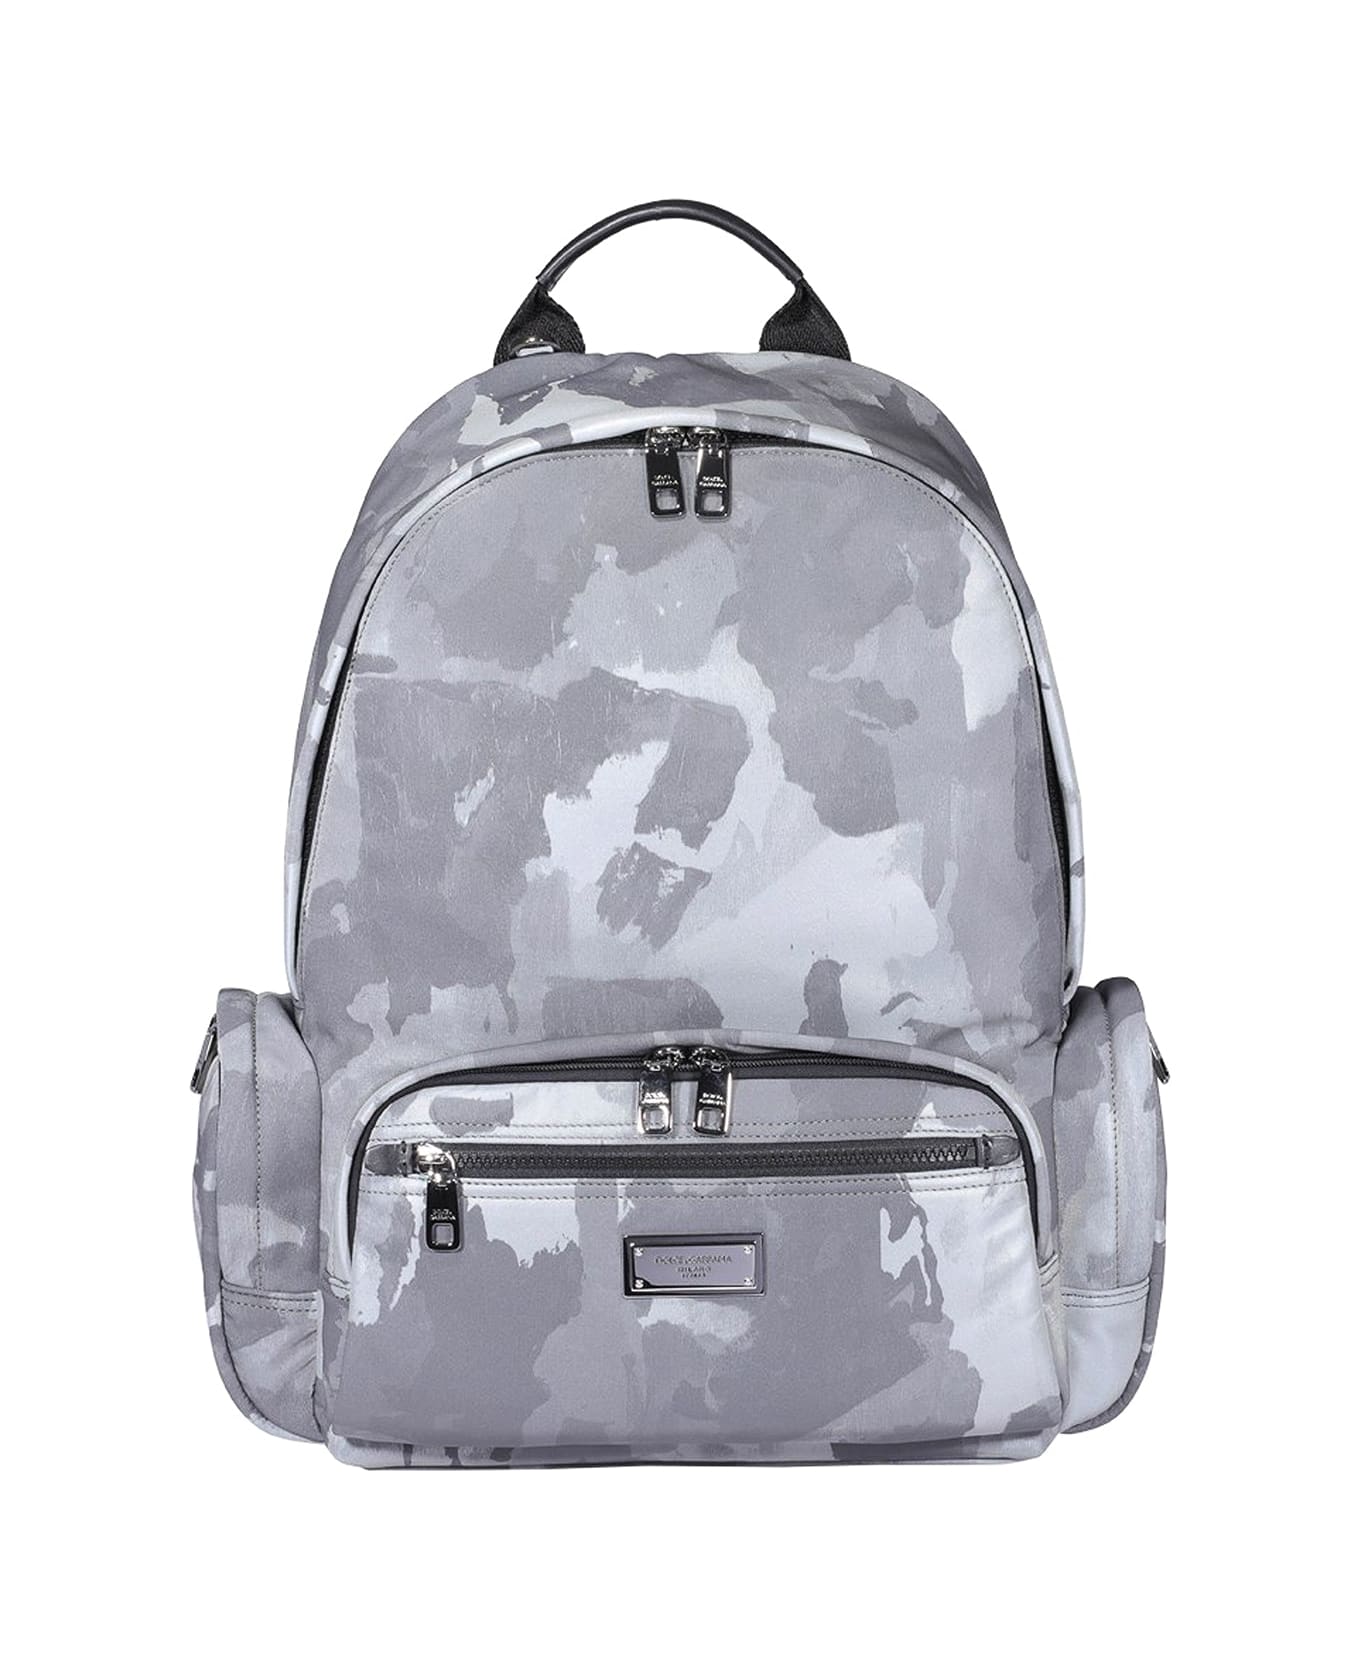 Dolce & Gabbana Camouflage Backpack - Gray